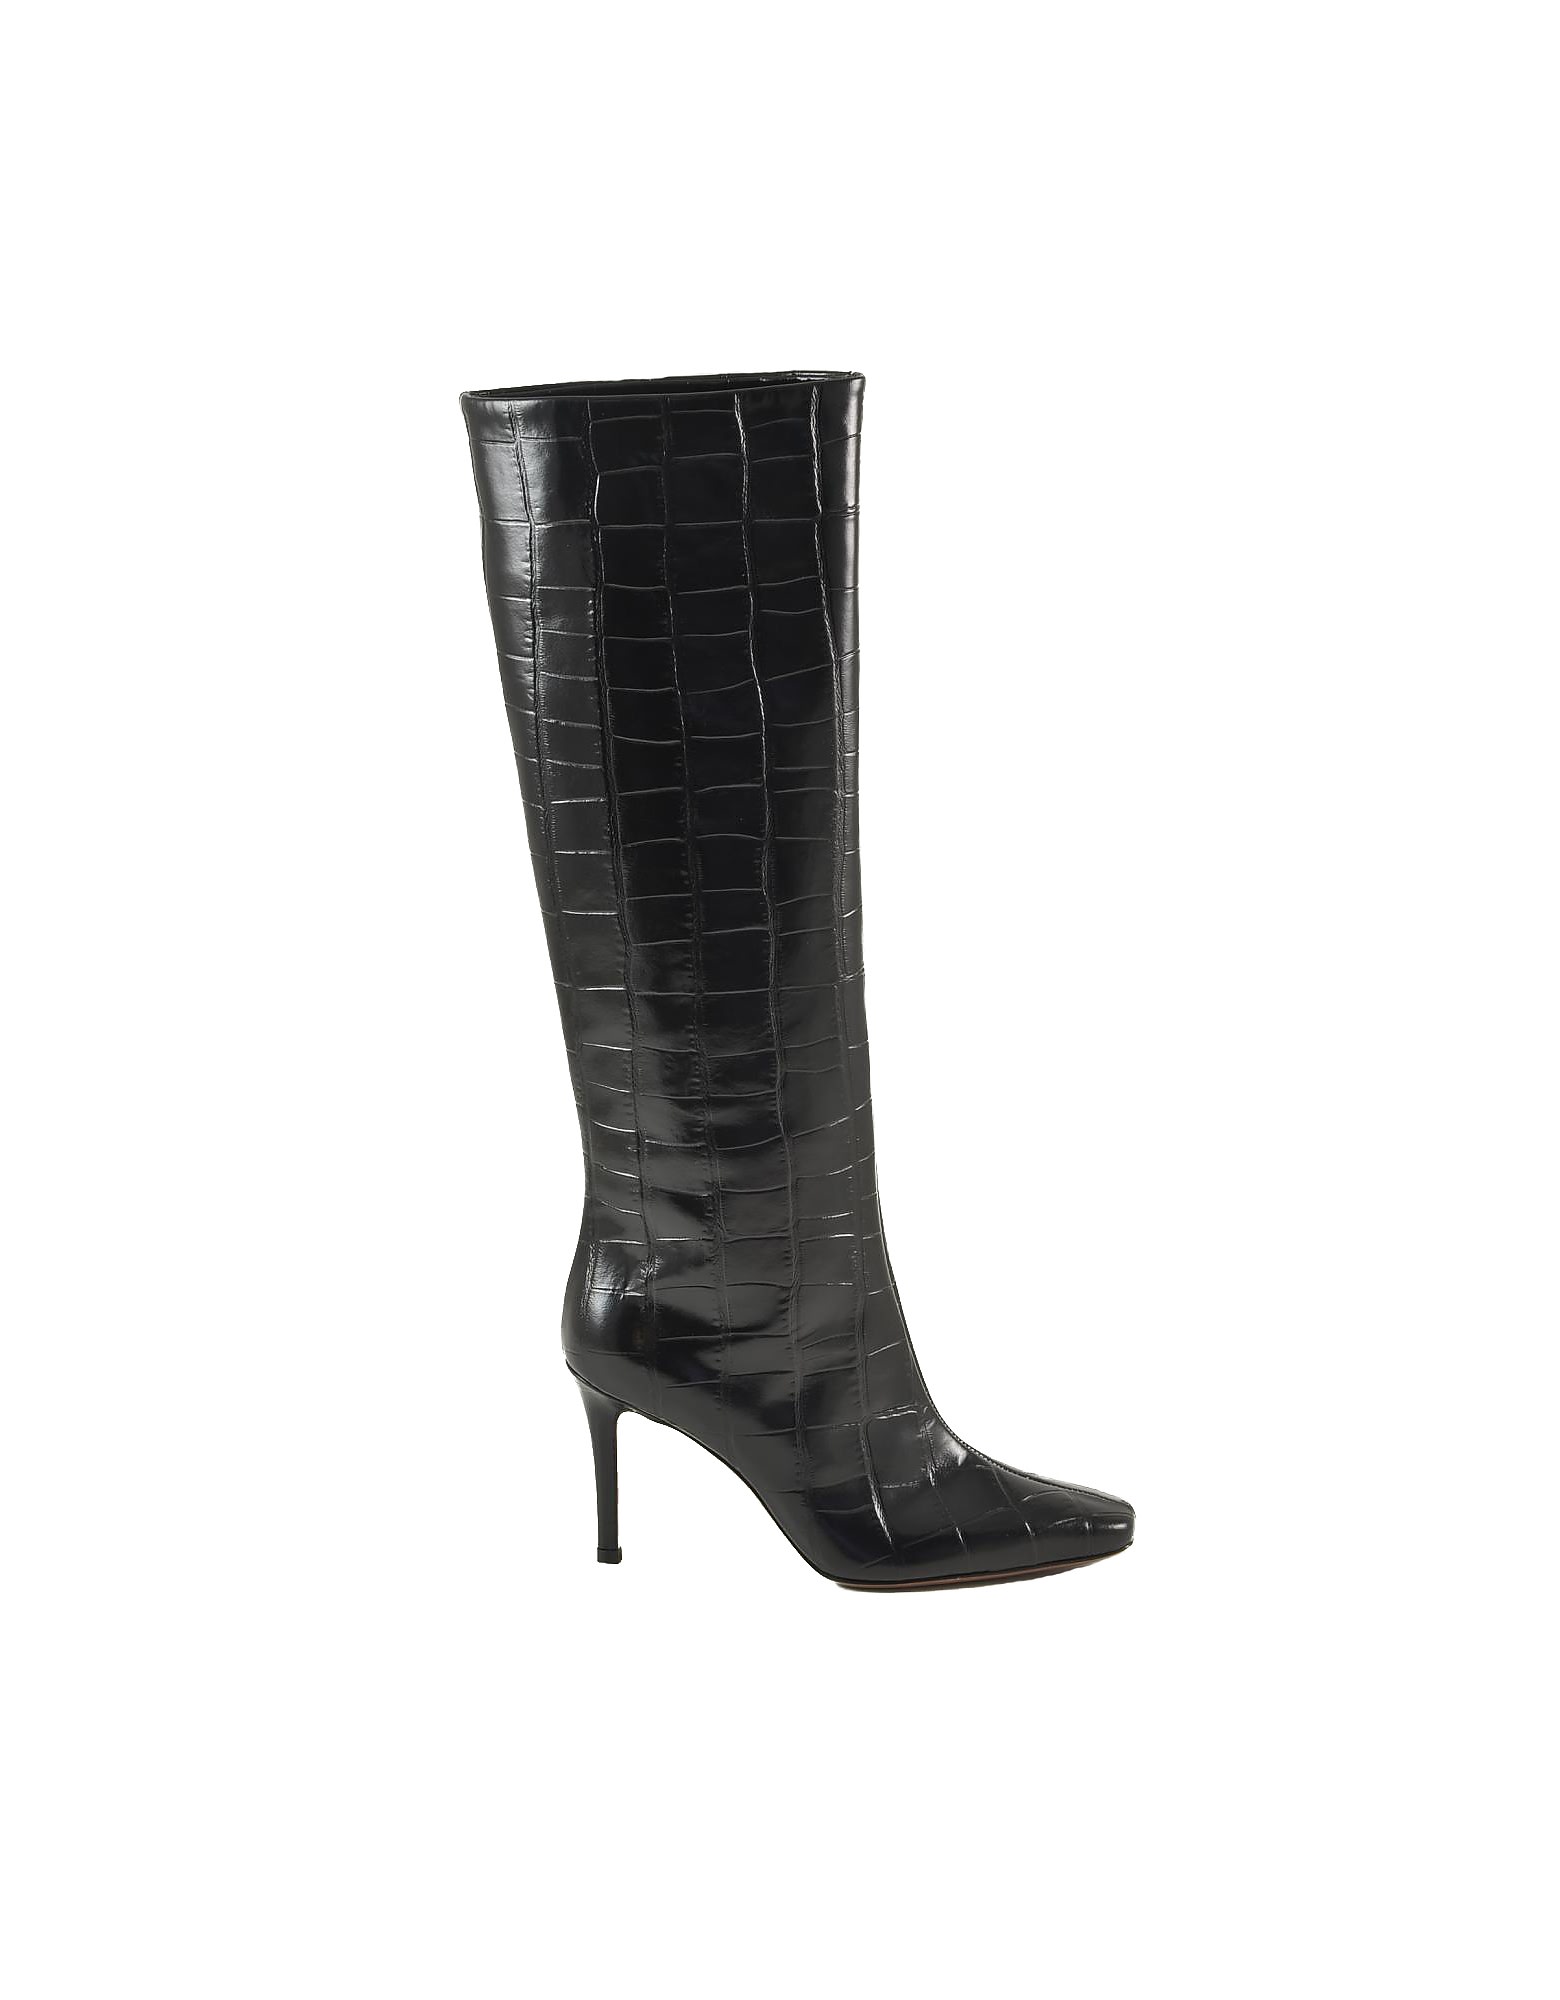 Lautre Chose Black Croco Embossed Leather Boots